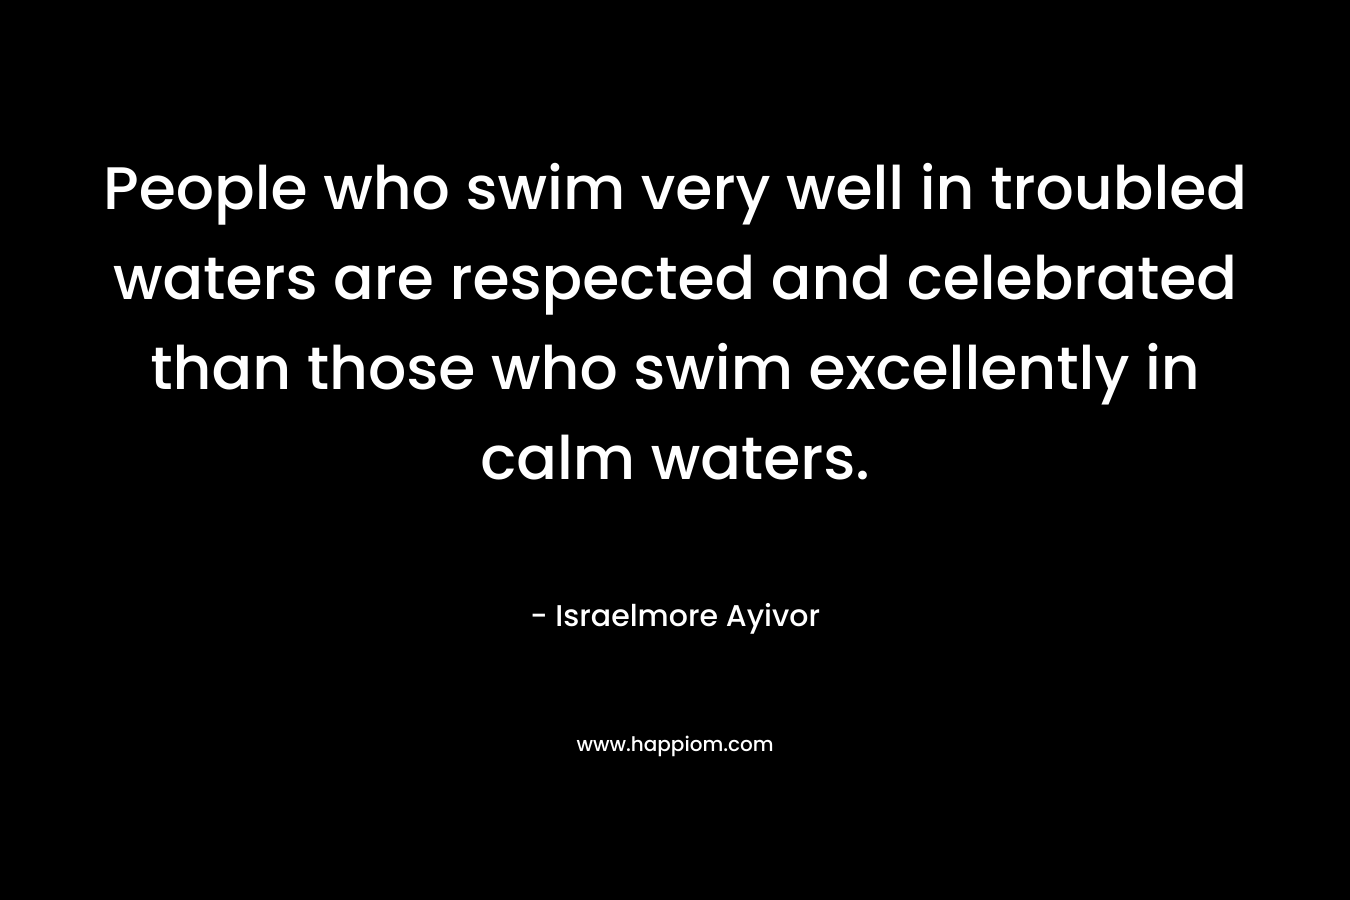 People who swim very well in troubled waters are respected and celebrated than those who swim excellently in calm waters.